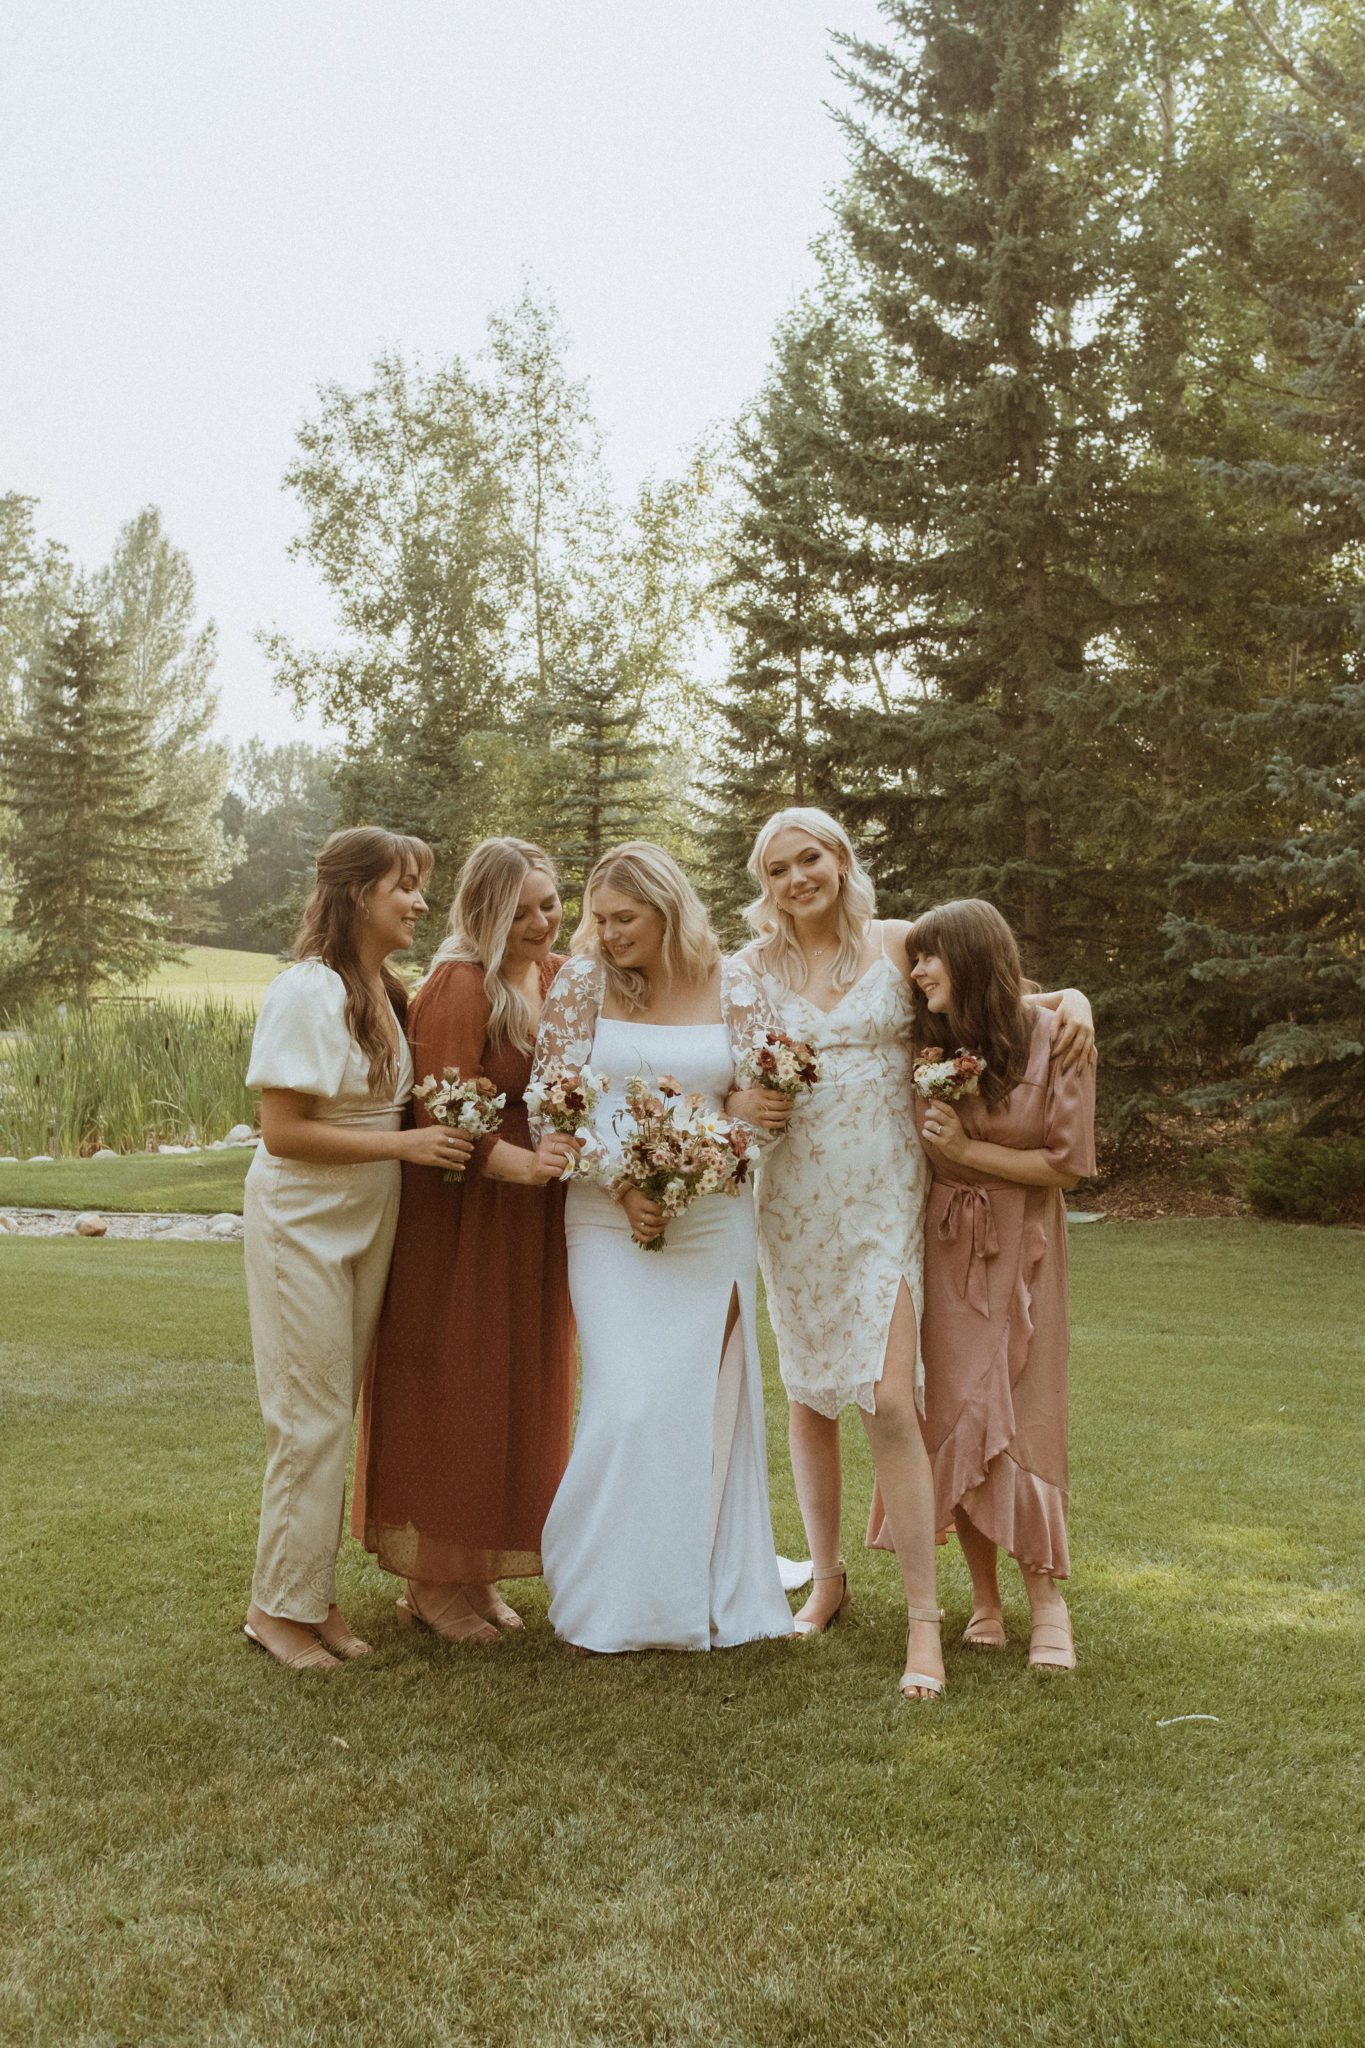 Bridal party for cottage core wedding, outdoor summer bridal attire, mismatched bridesmaids dresses